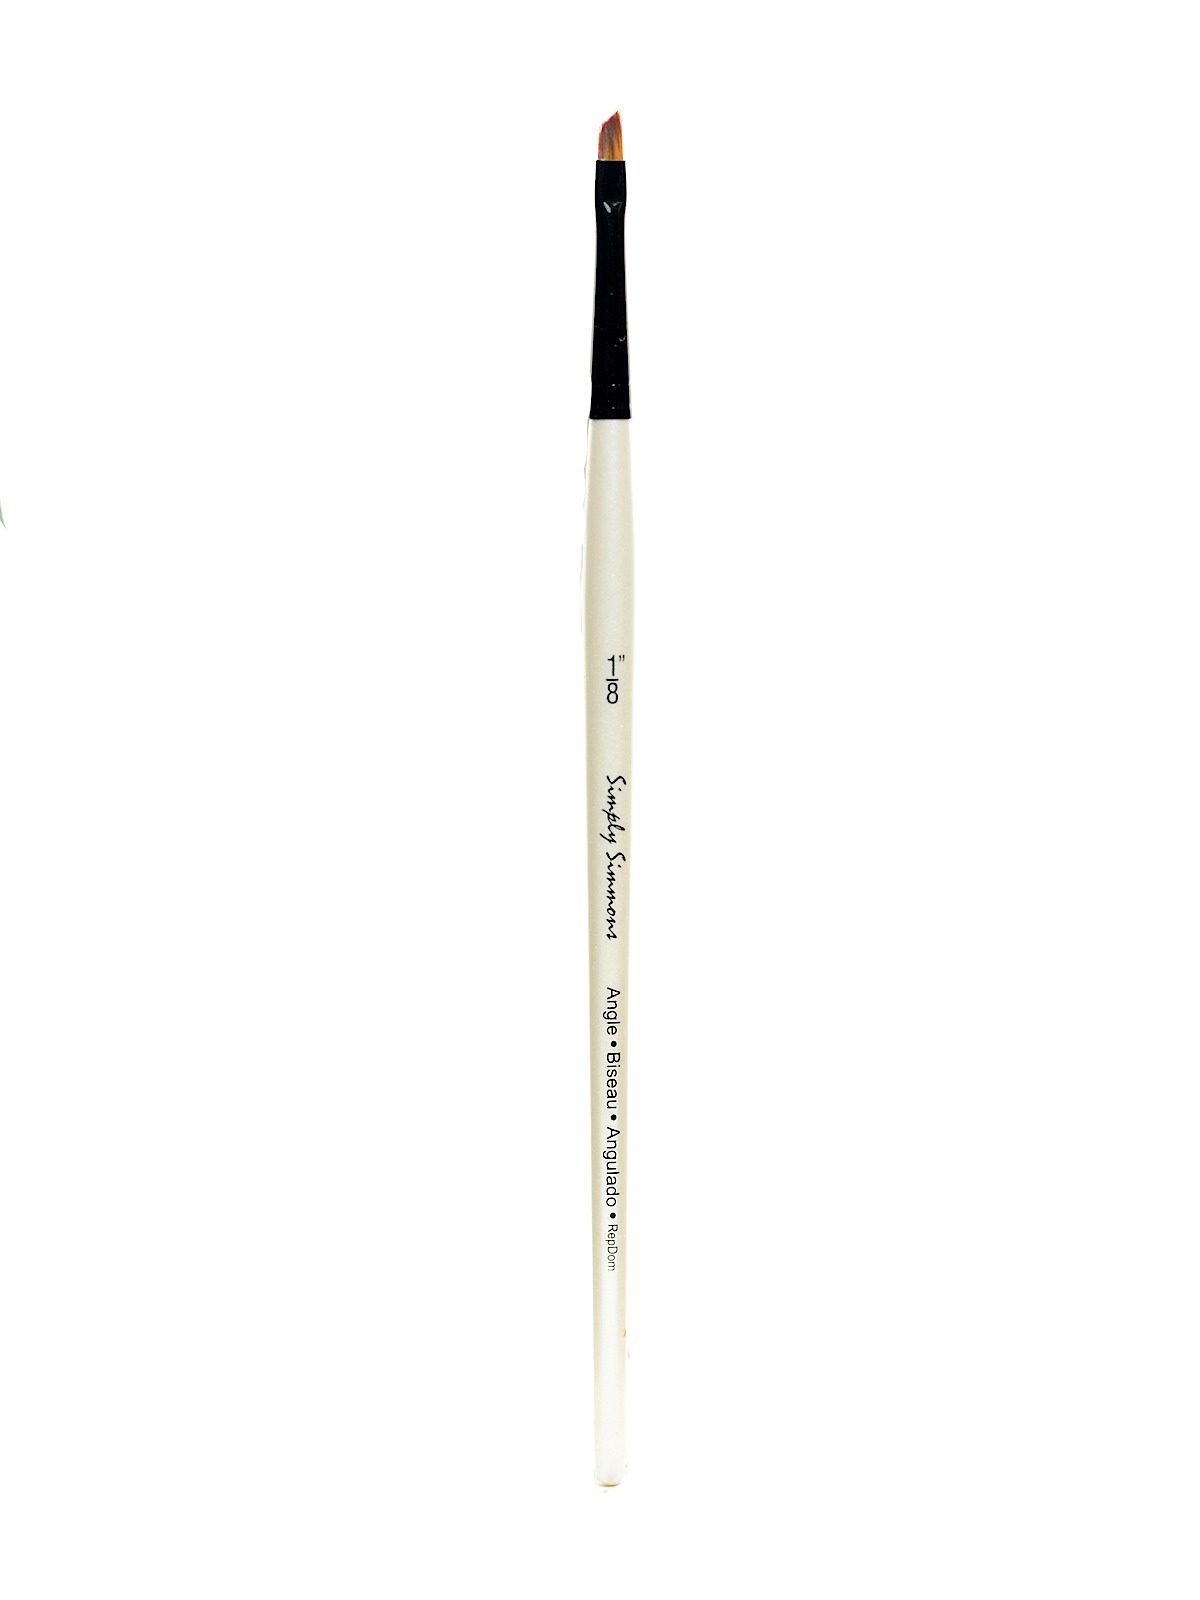 Simply Simmons Short Handle Brushes Angle Shader 1 8 In.